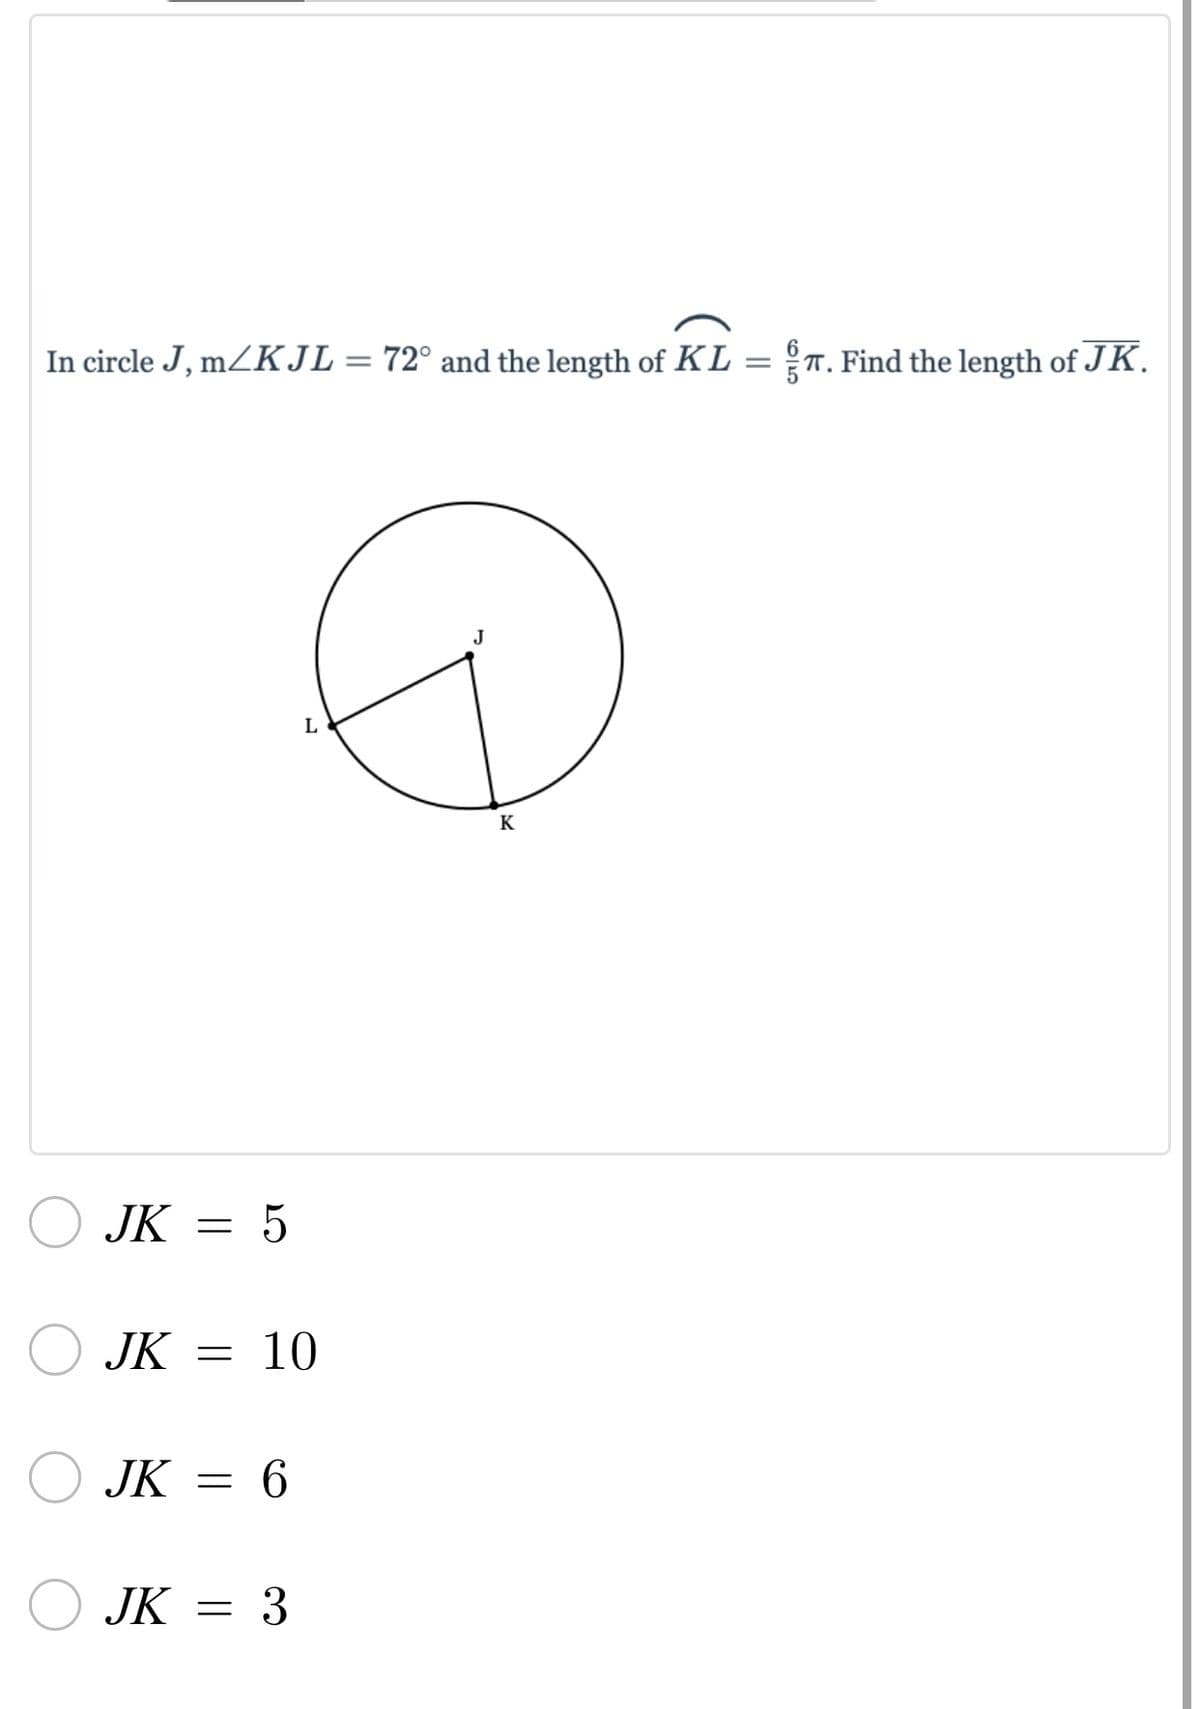 In circle J, m/KJL = 72° and the length of KL = §. Find the length of JK.
J
L
JK
JK
JK
JK
=
=
=
5
10
6
3
K